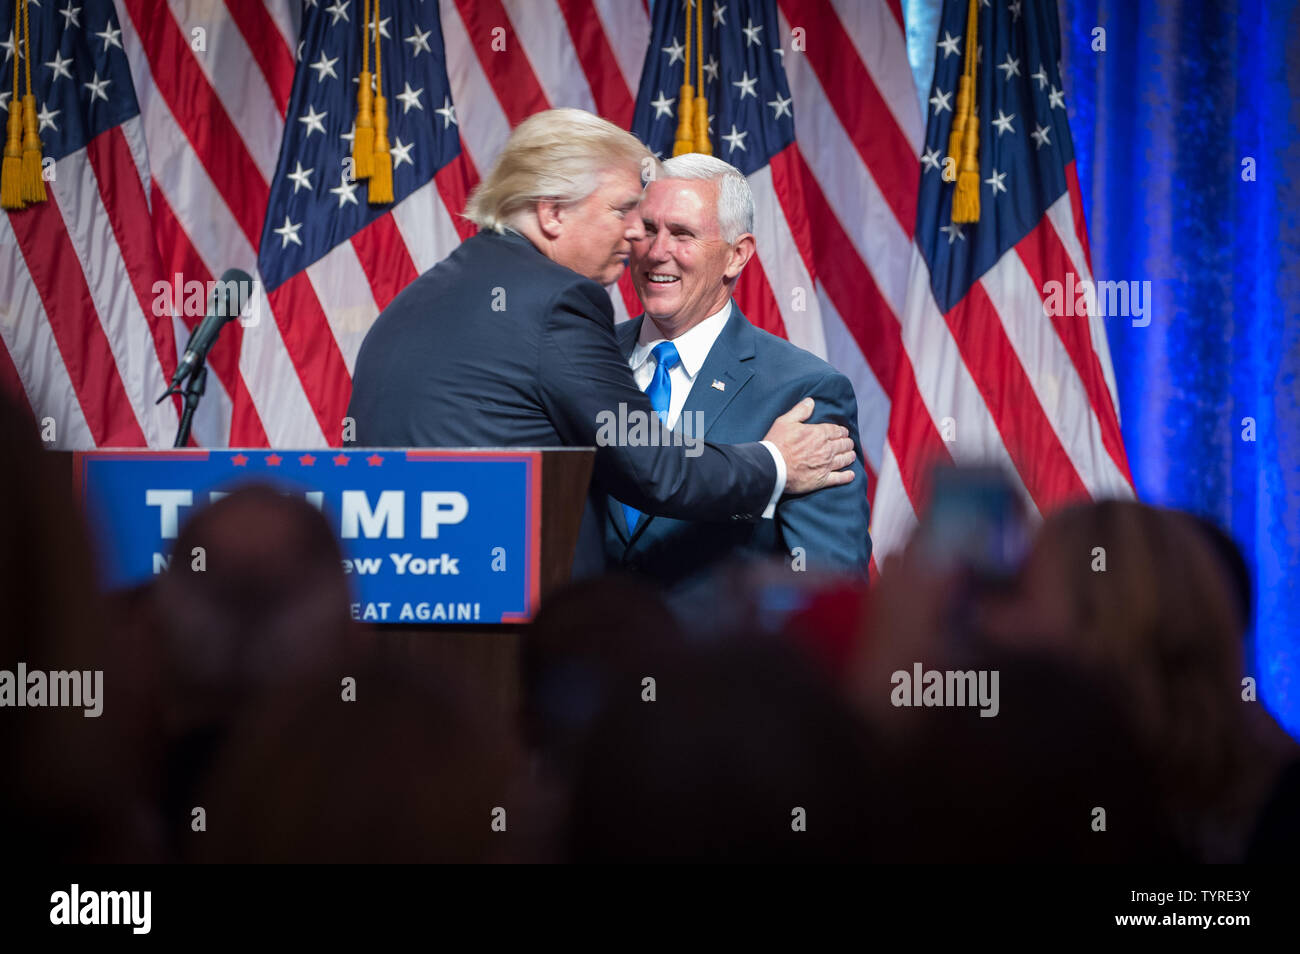 Presumptive Republican nominee for President Donald Trump greets his pick for Vice President Mike Pence at a press conference at the New York Hilton on July 16, 2016 in New York City. Photo by Bryan R. Smith/UPI Stock Photo